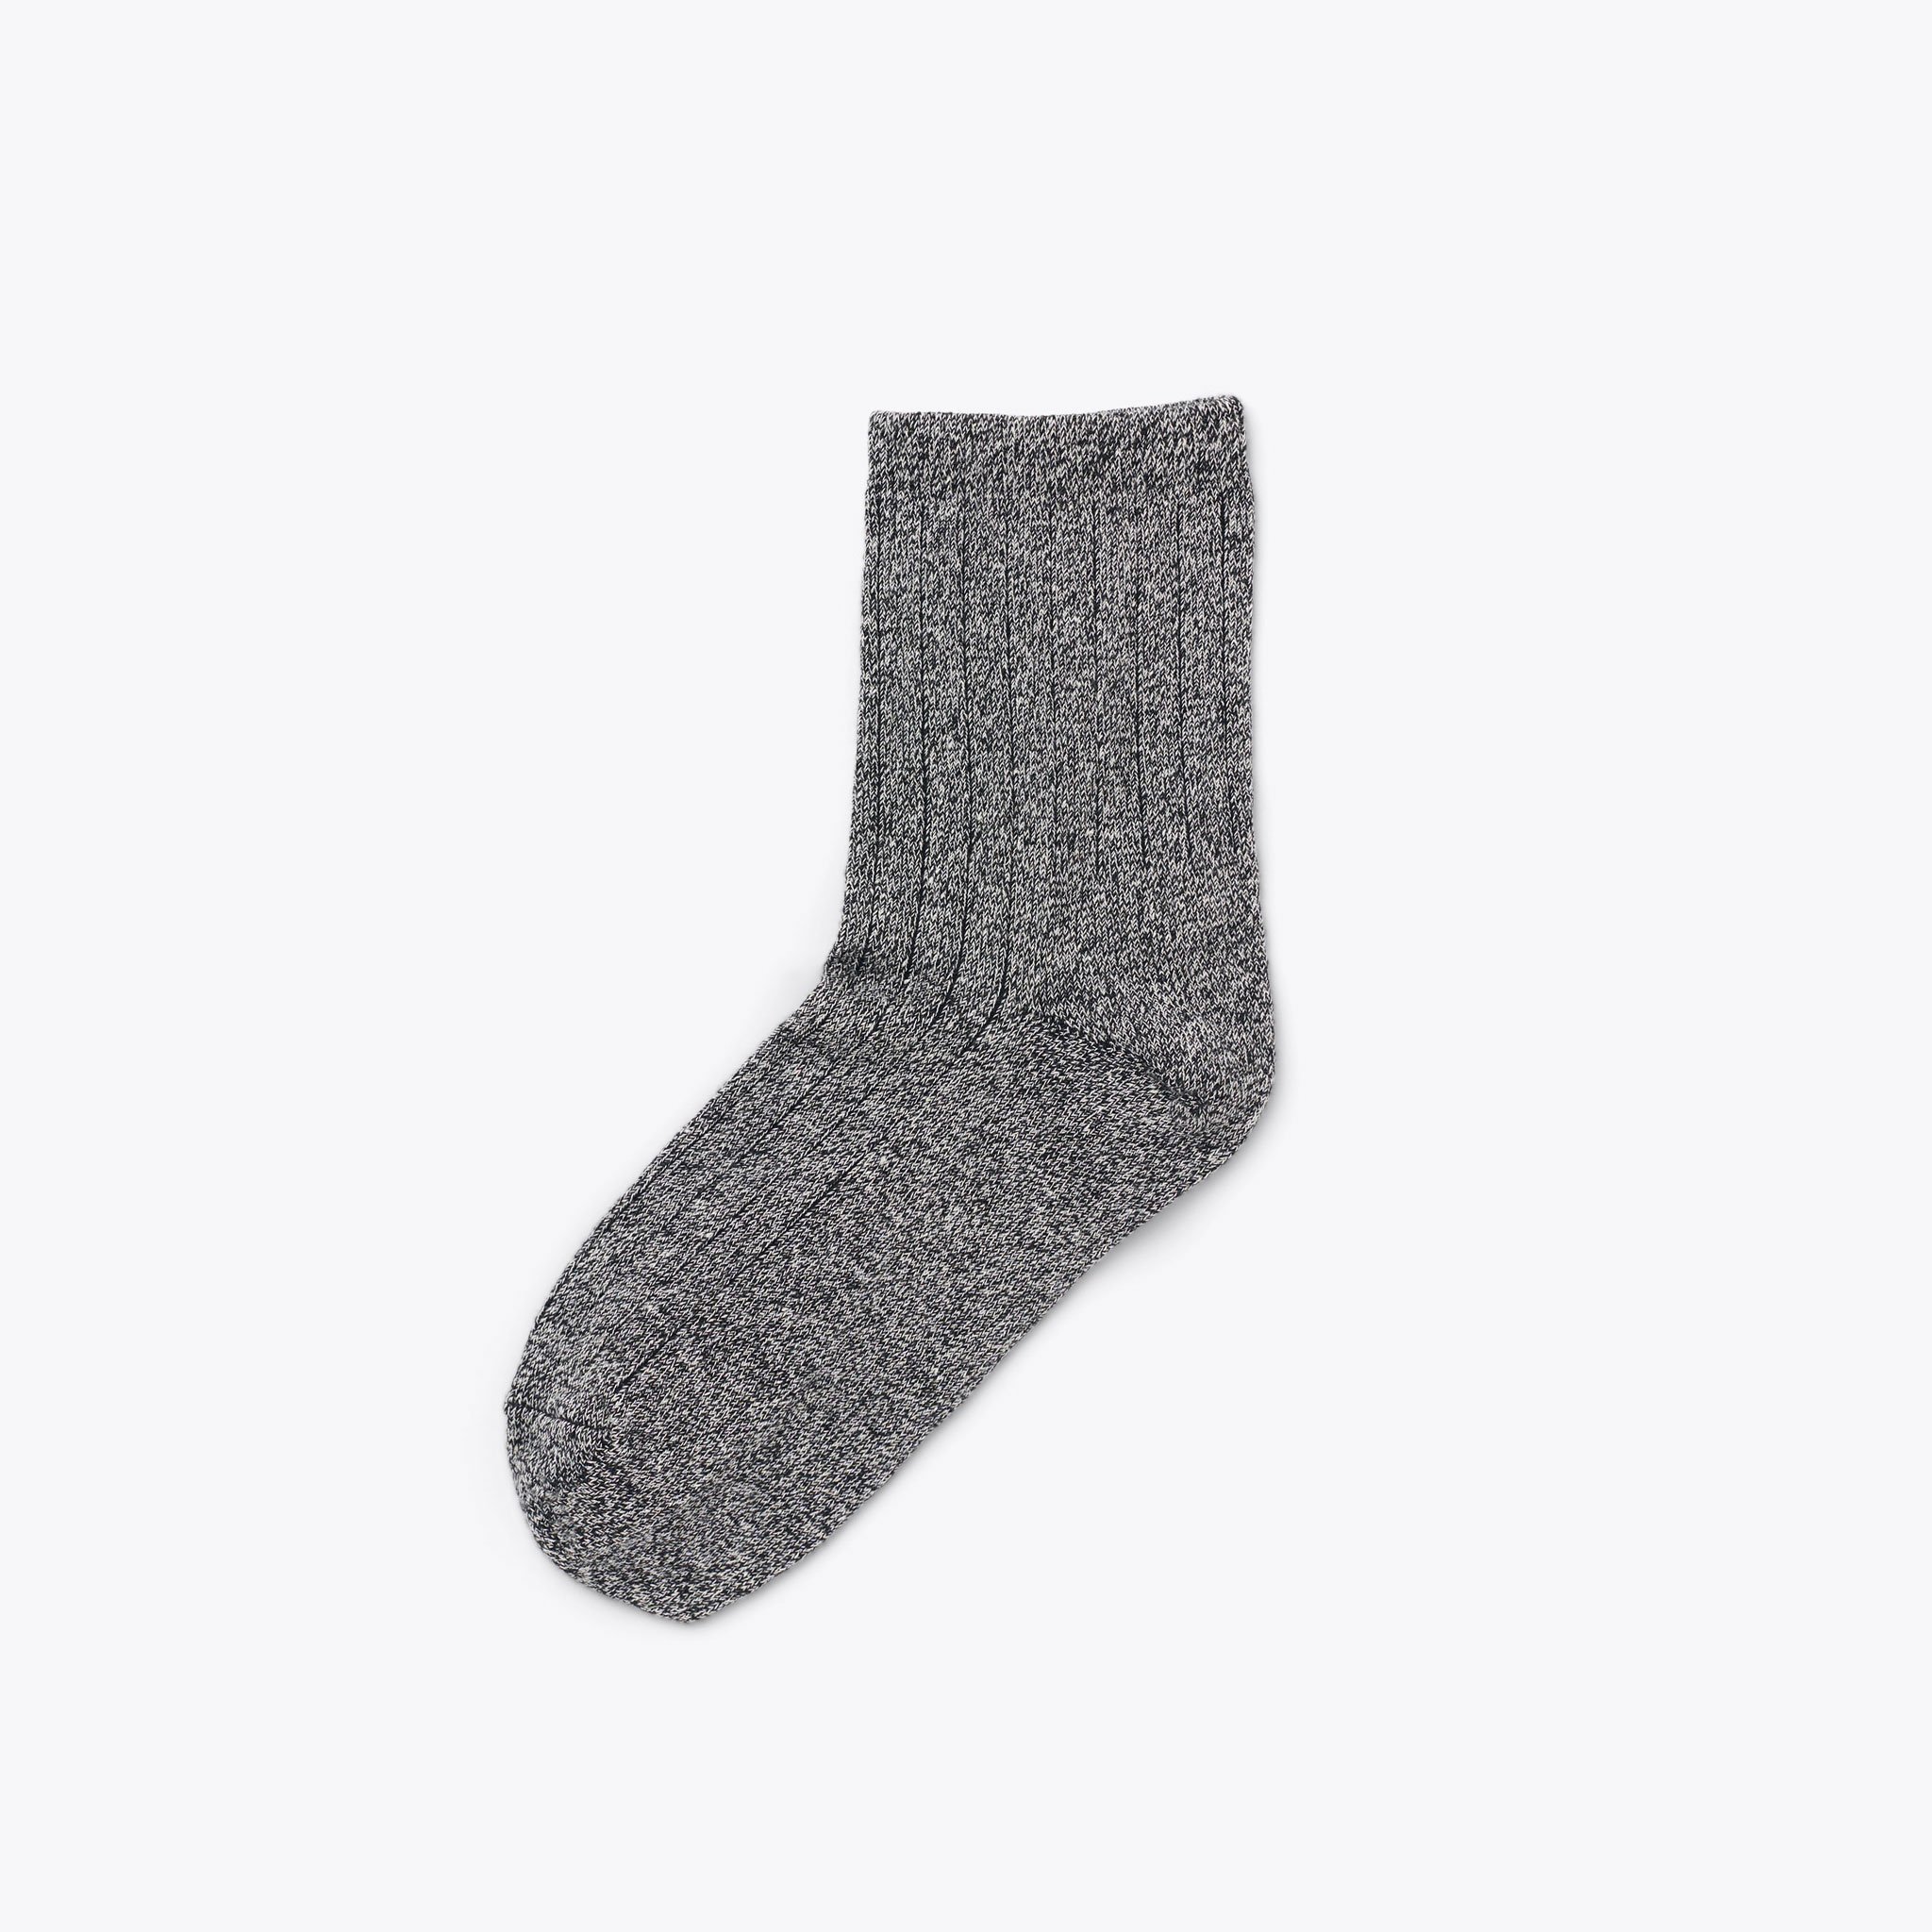 Nisolo Cotton Mid Sock Heather Black Marl - Every Nisolo product is built on the foundation of comfort, function, and design. 